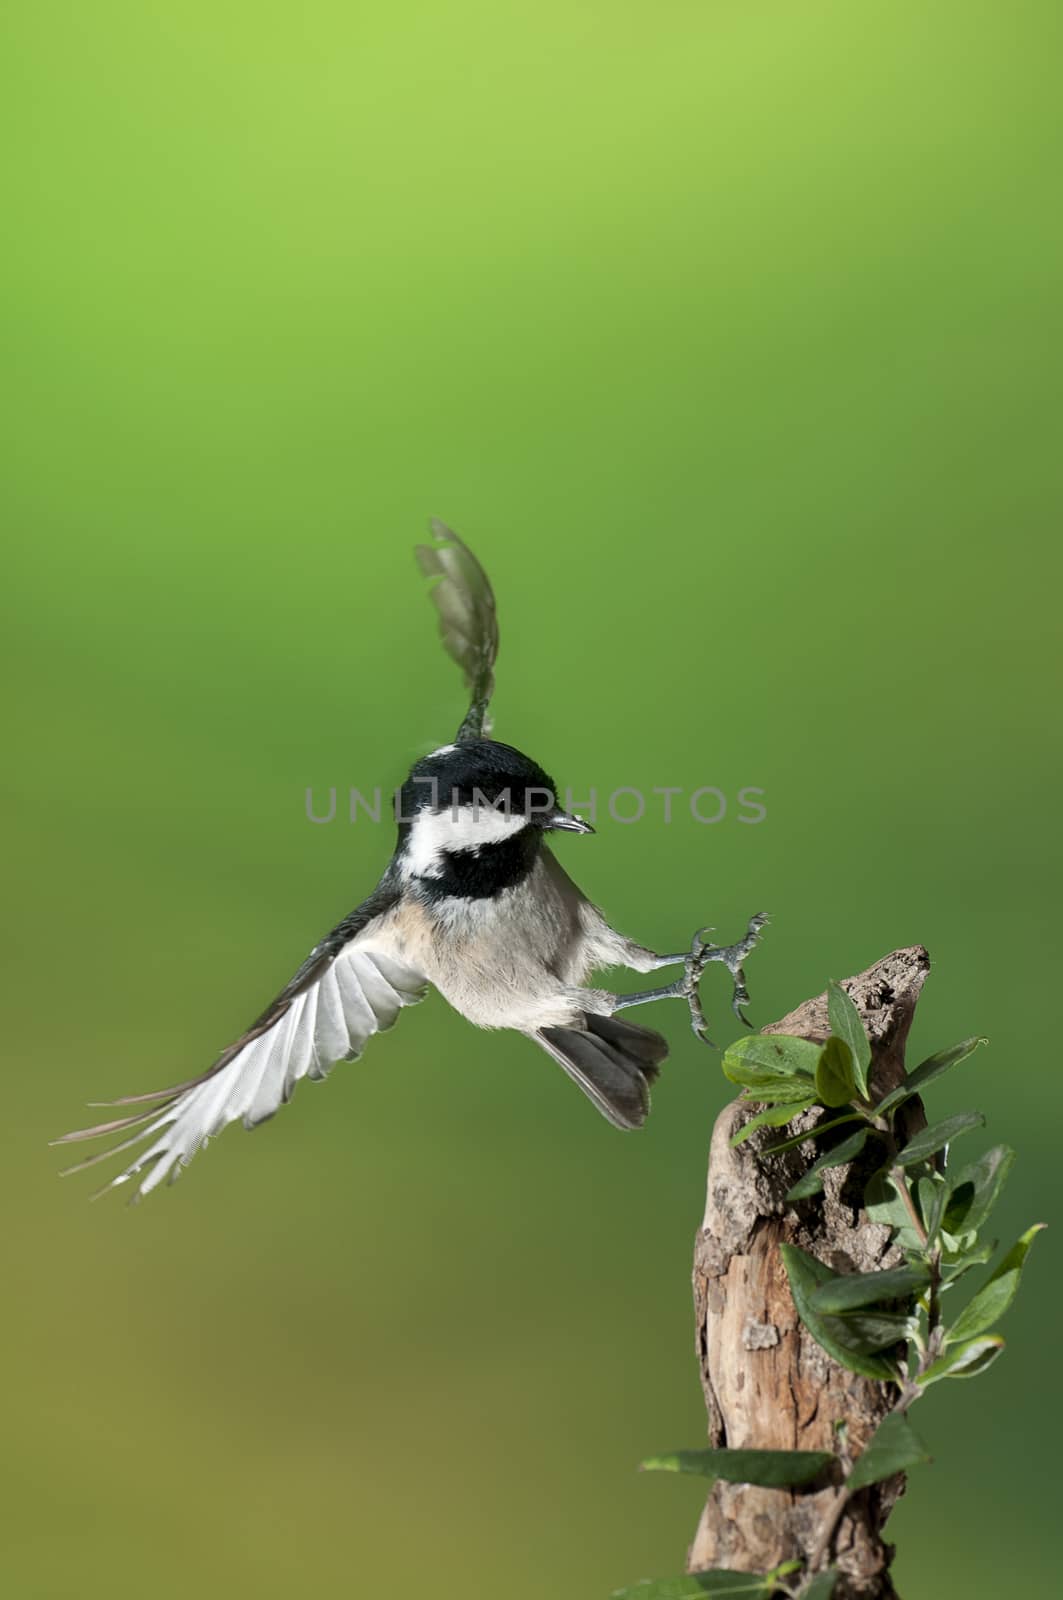 Coal tit (Periparus ater), bird flying by jalonsohu@gmail.com